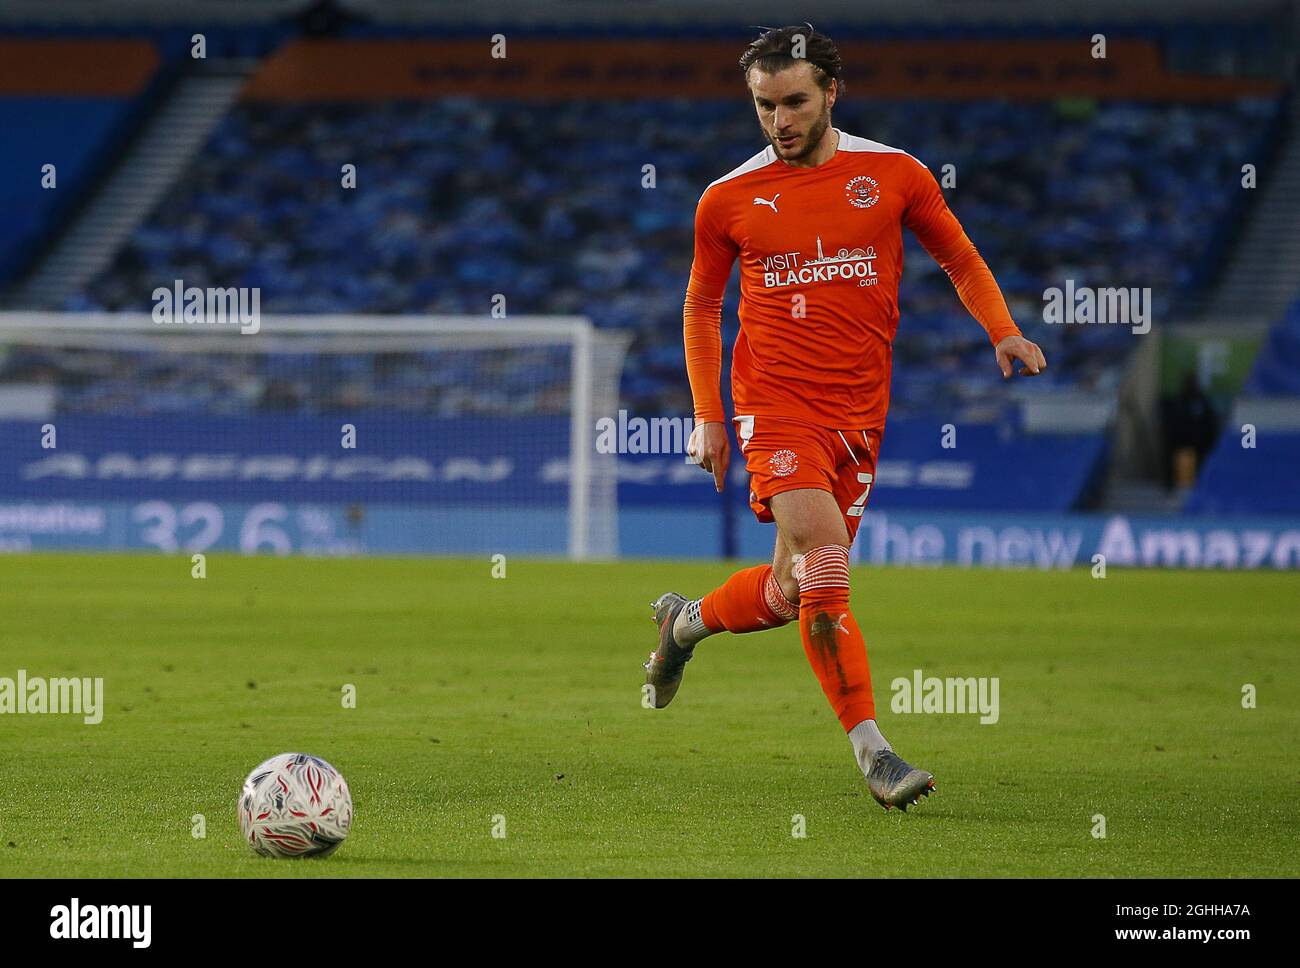 Luke Garbutt of Blackpool during the FA Cup match at the AMEX Stadium, Brighton and Hove. Picture date: 23rd January 2021. Picture credit should read: Paul Terry/Sportimage via PA Images Stock Photo